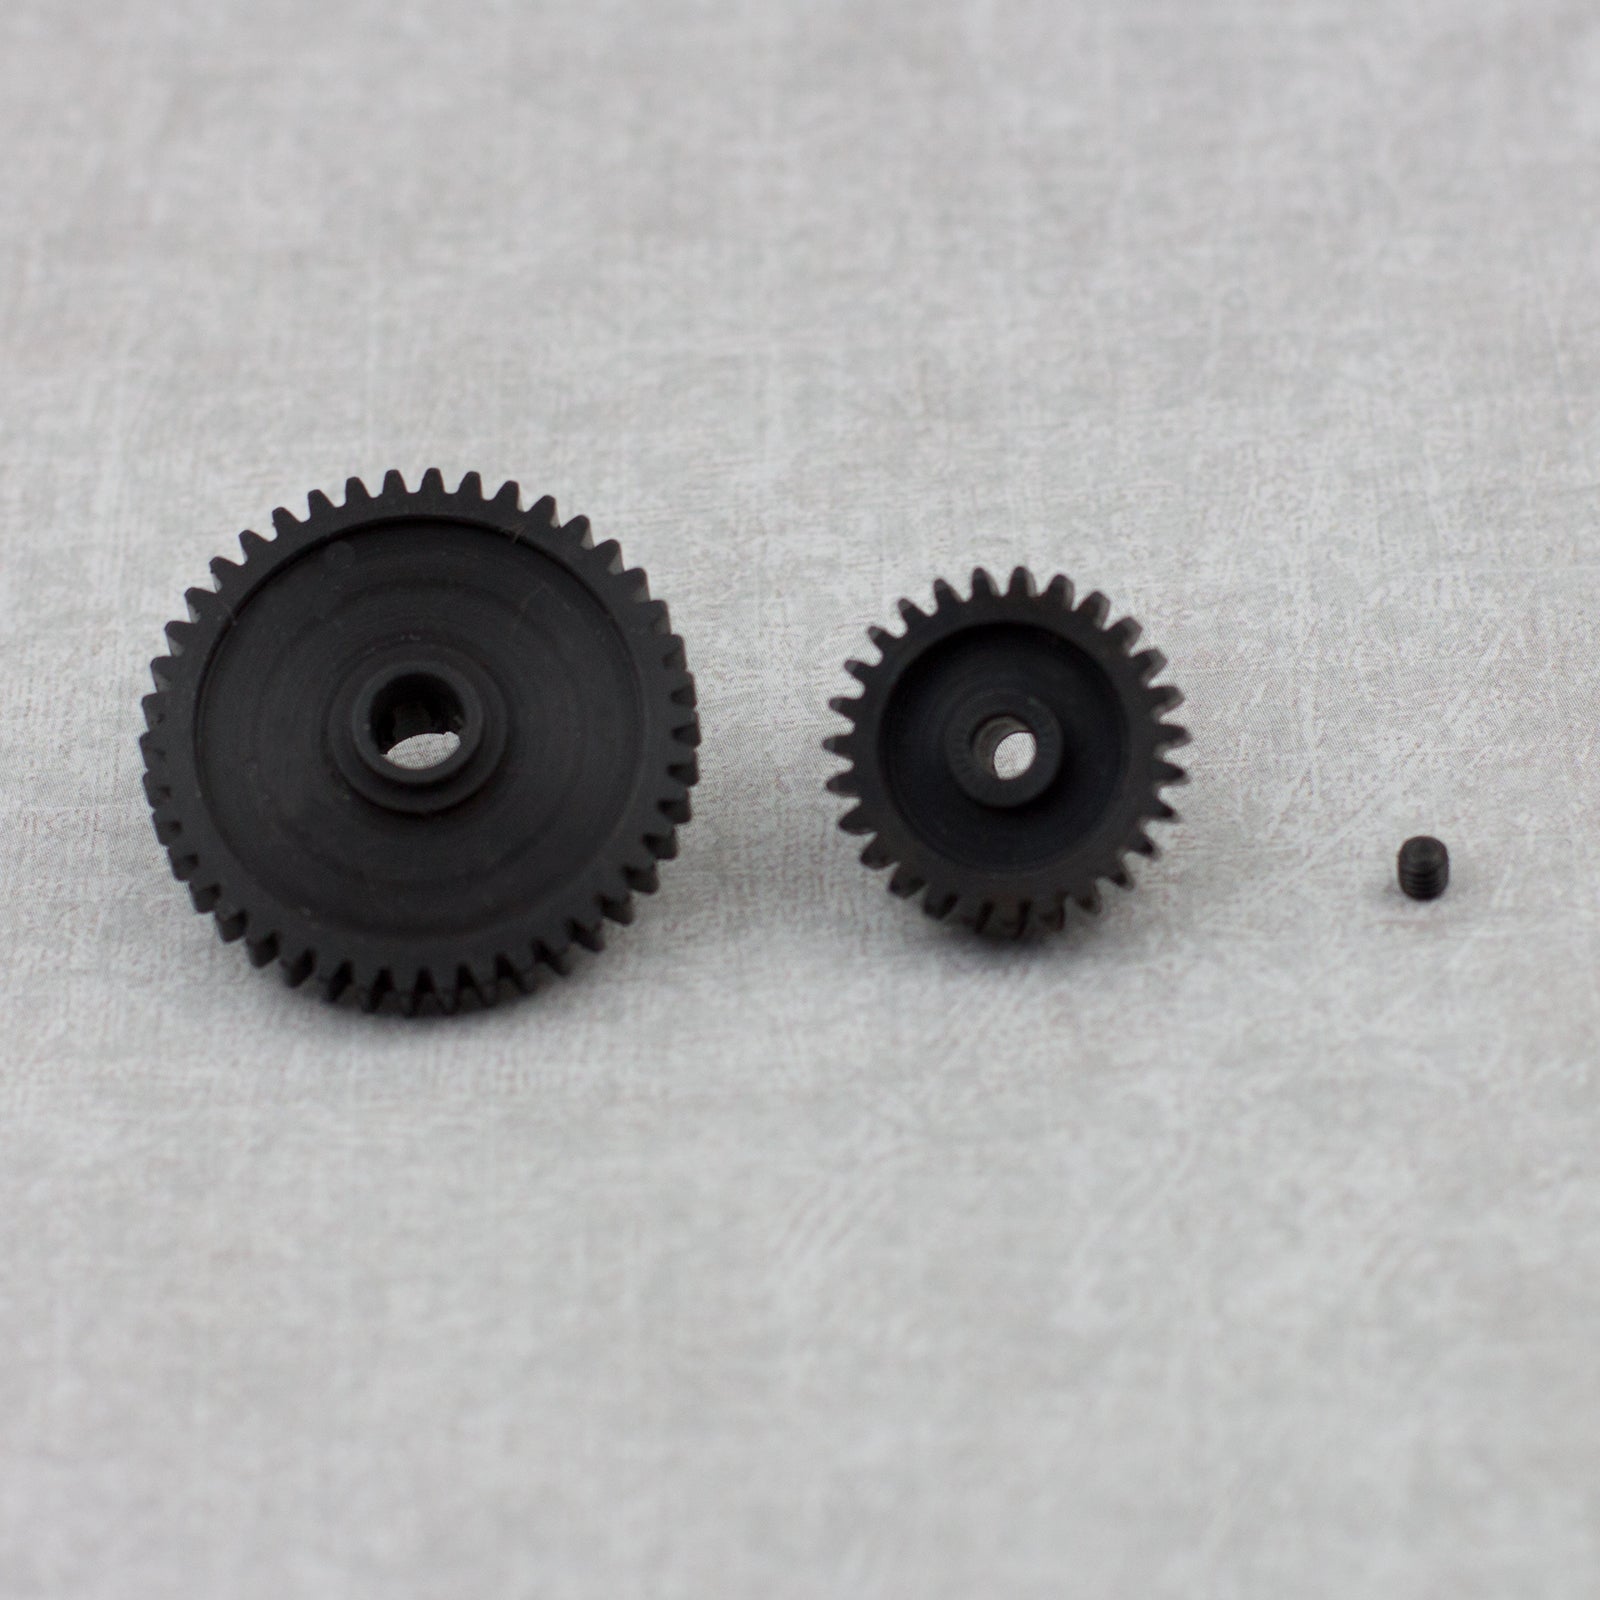 27T Pinion and 42T Reduction Gear Kit for 540 Motor